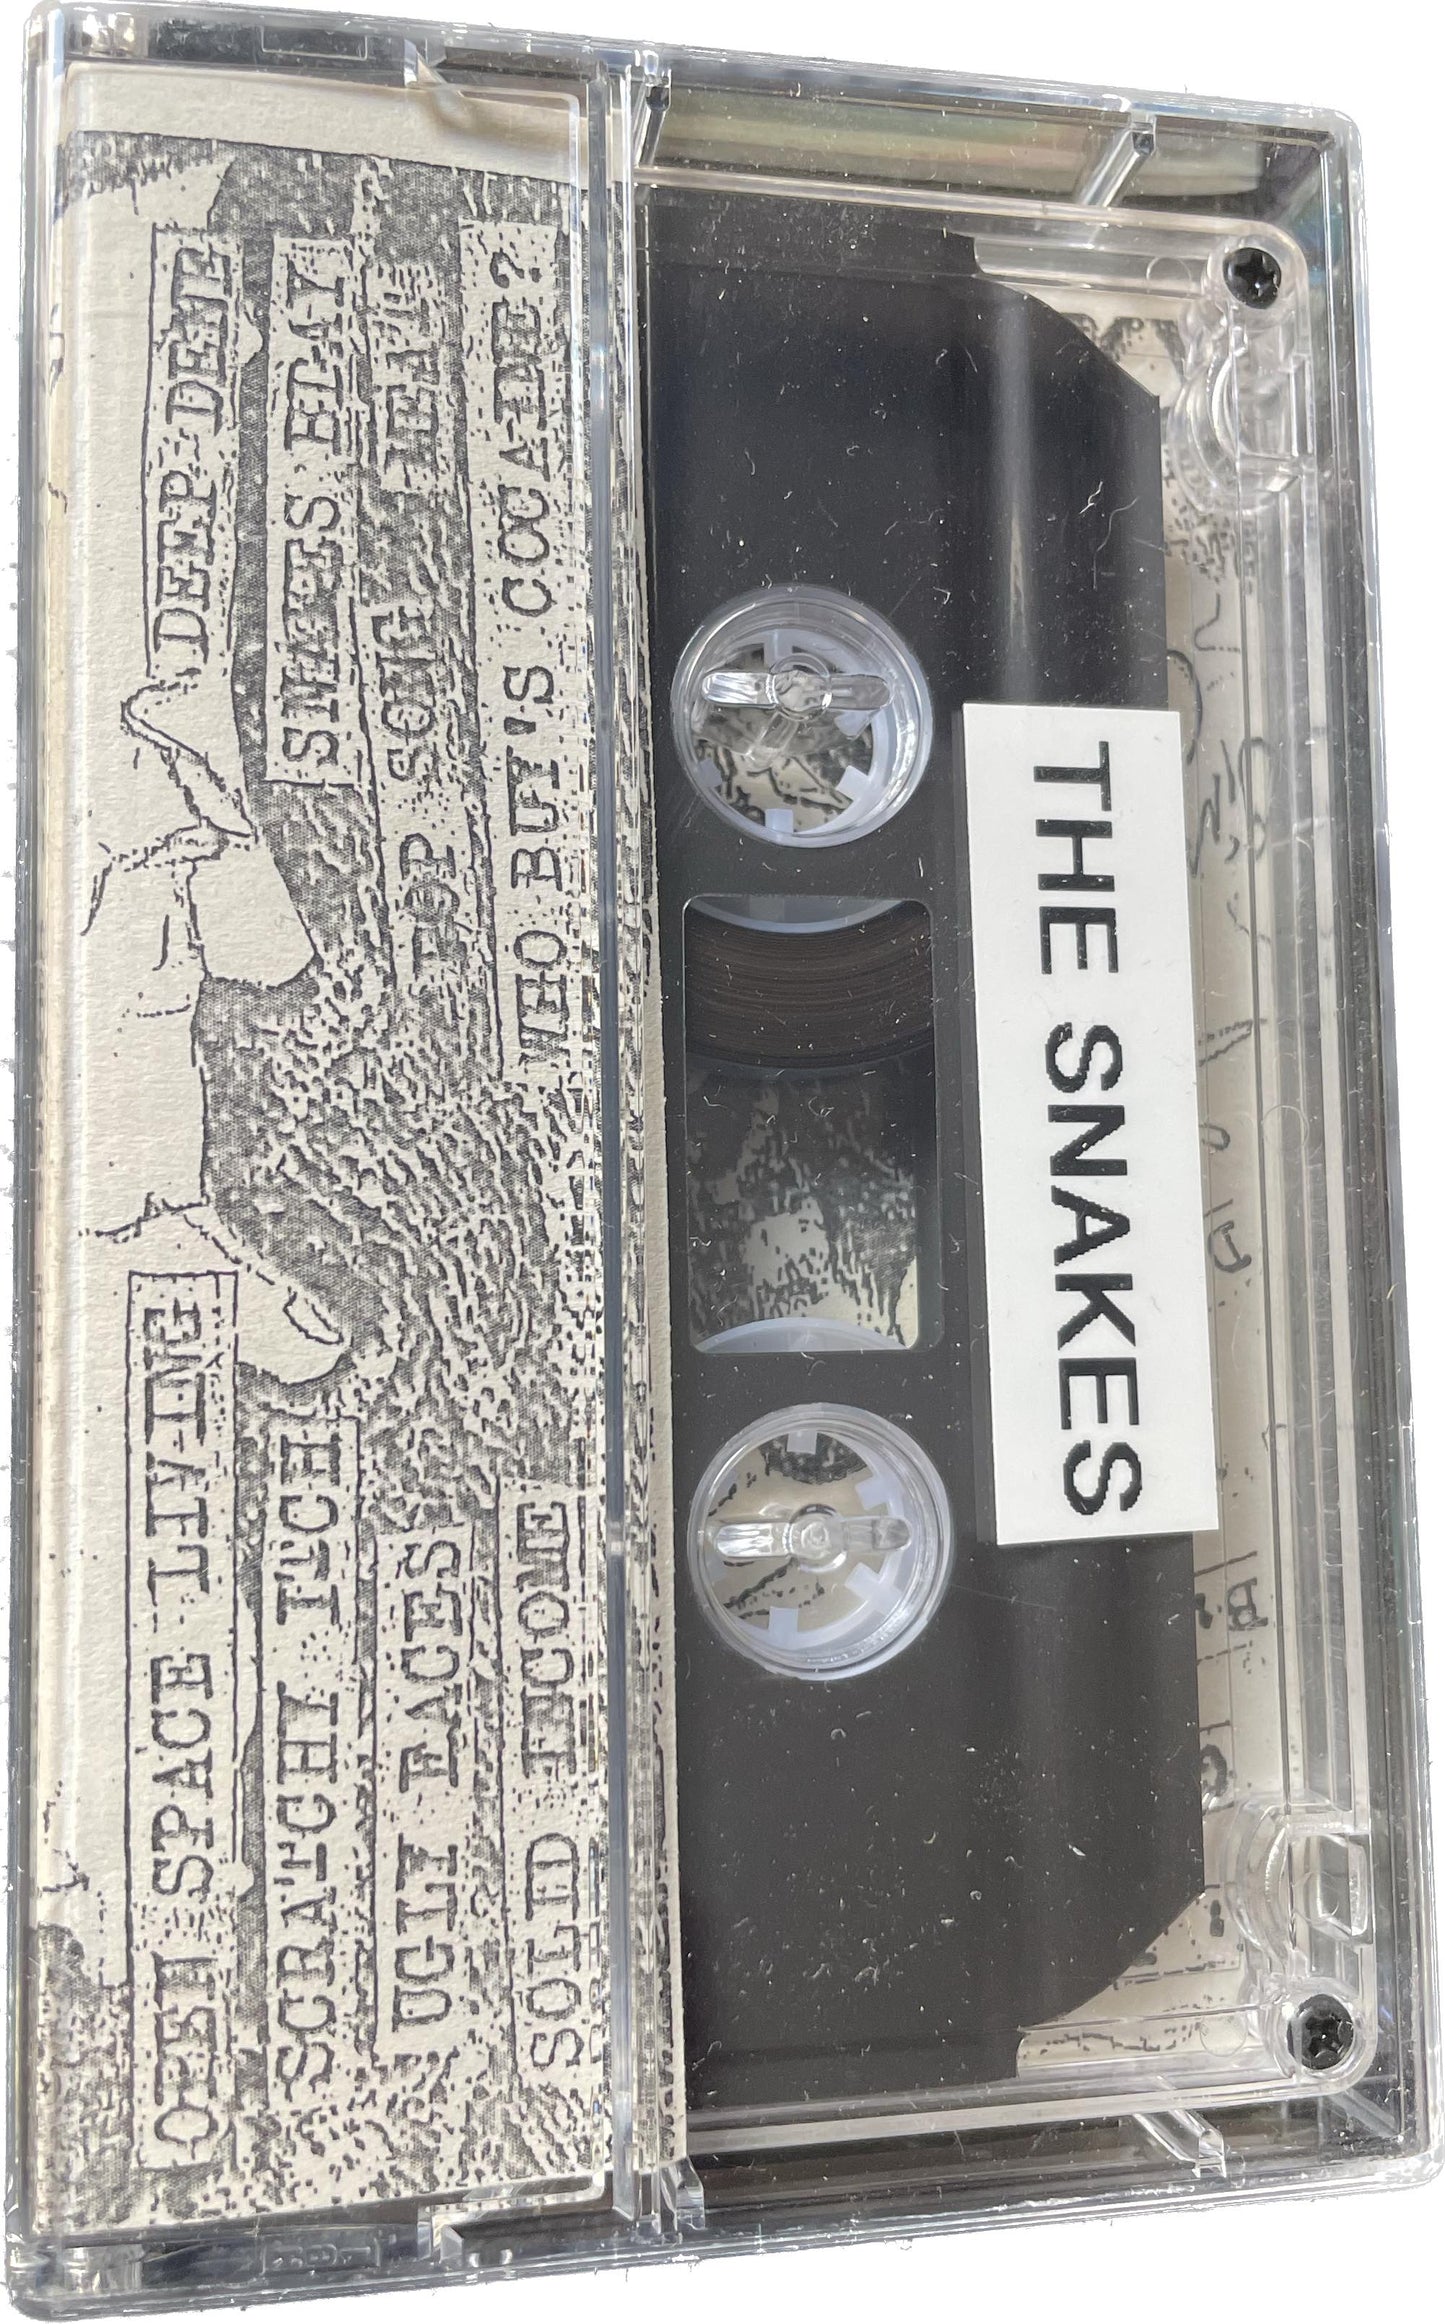 The Snakes "Live at Bar Open, 3 Aug '19" Cassette